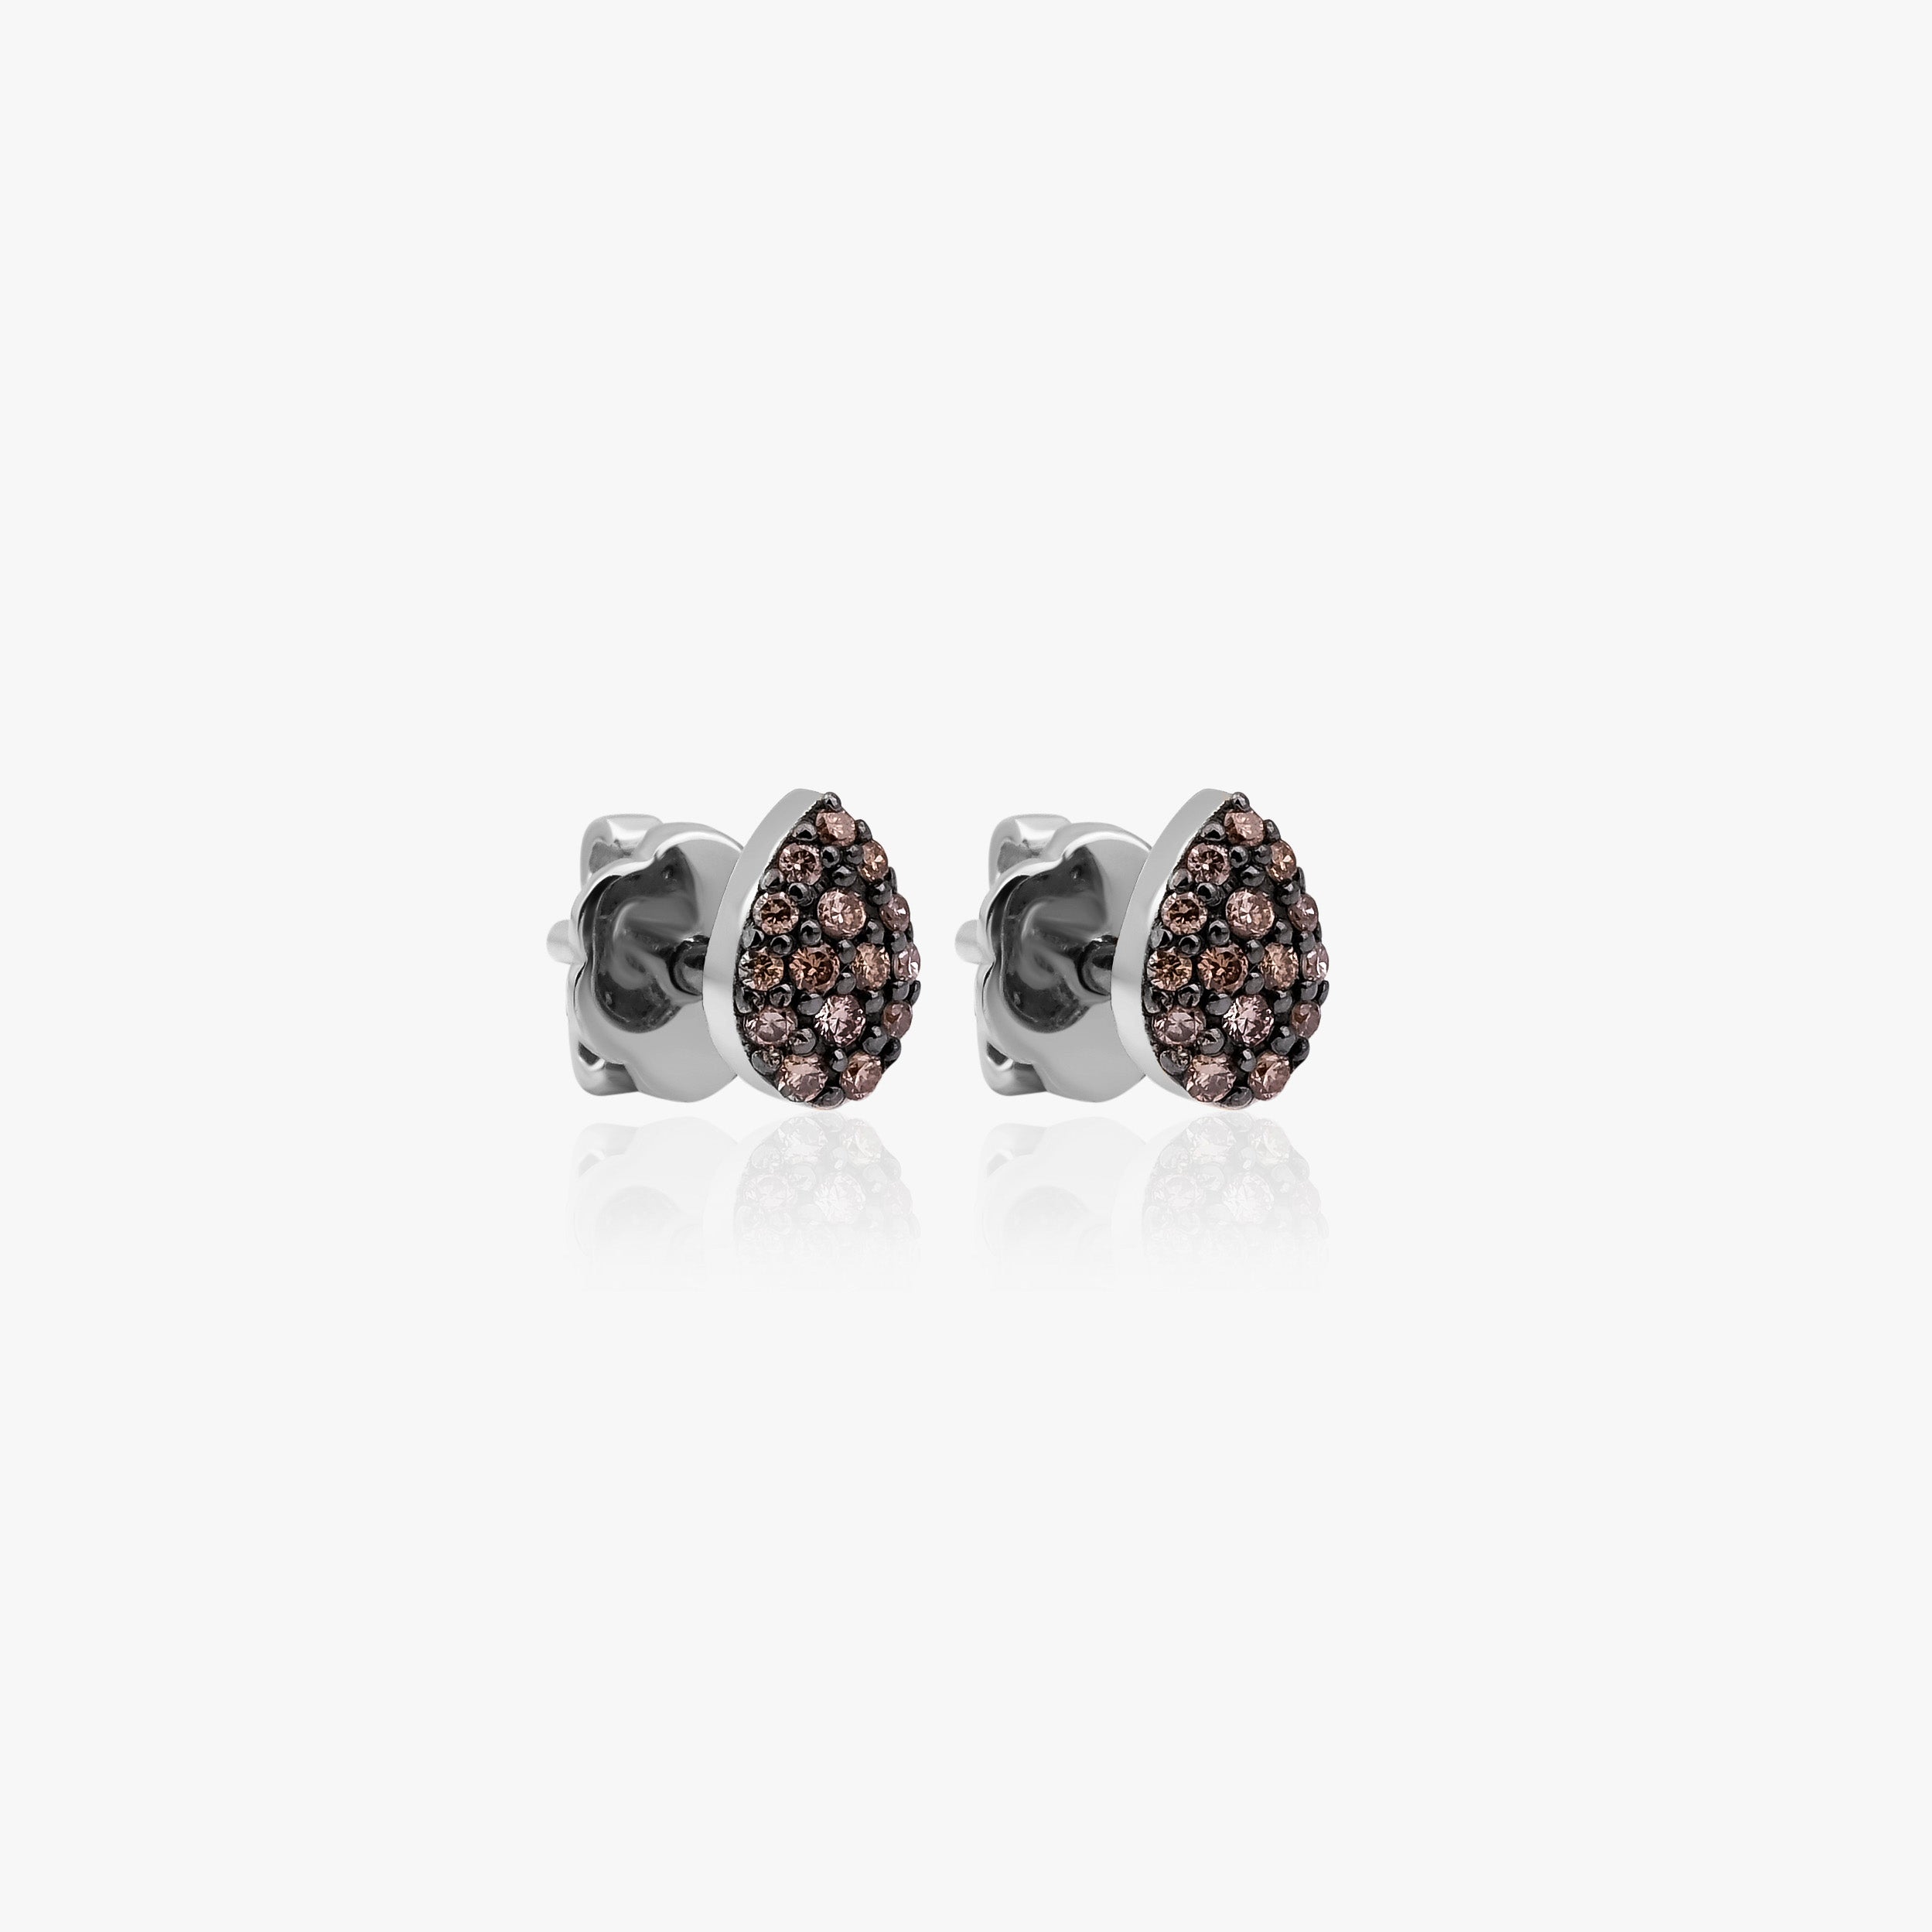 Chocolate Diamond Earrings Available in 14K and 18K Gold